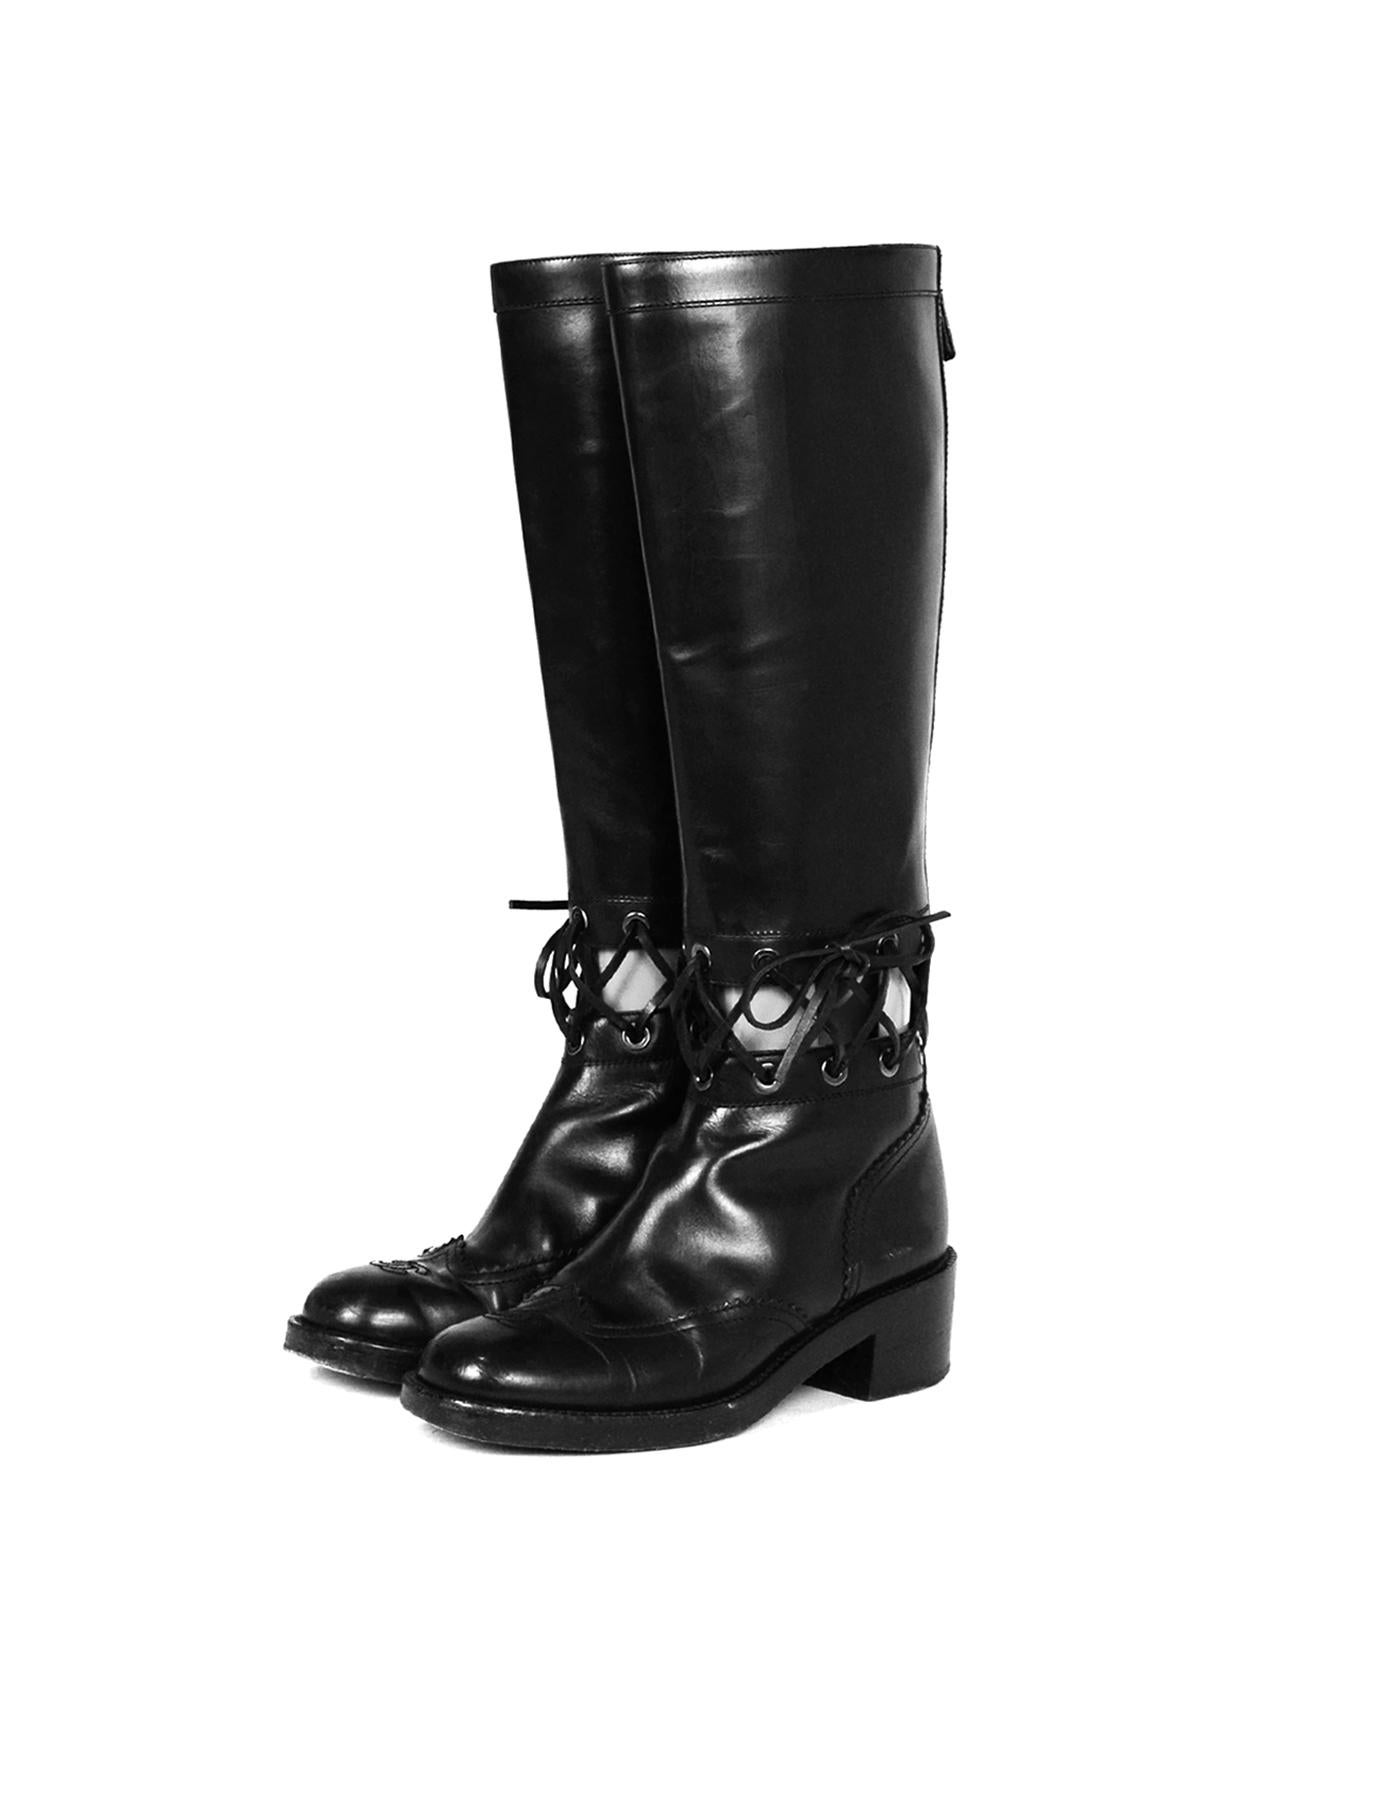 Chanel Black Leather Boots with Lace Cut Out sz 38.5

Made In: Italy 
Color: Black
Hardware: Silvertone
Materials: Leather
Closure/Opening: Back Zip
Overall Condition: Good pre-owned condition, marks and scuffs on the back of the heel, wear on the